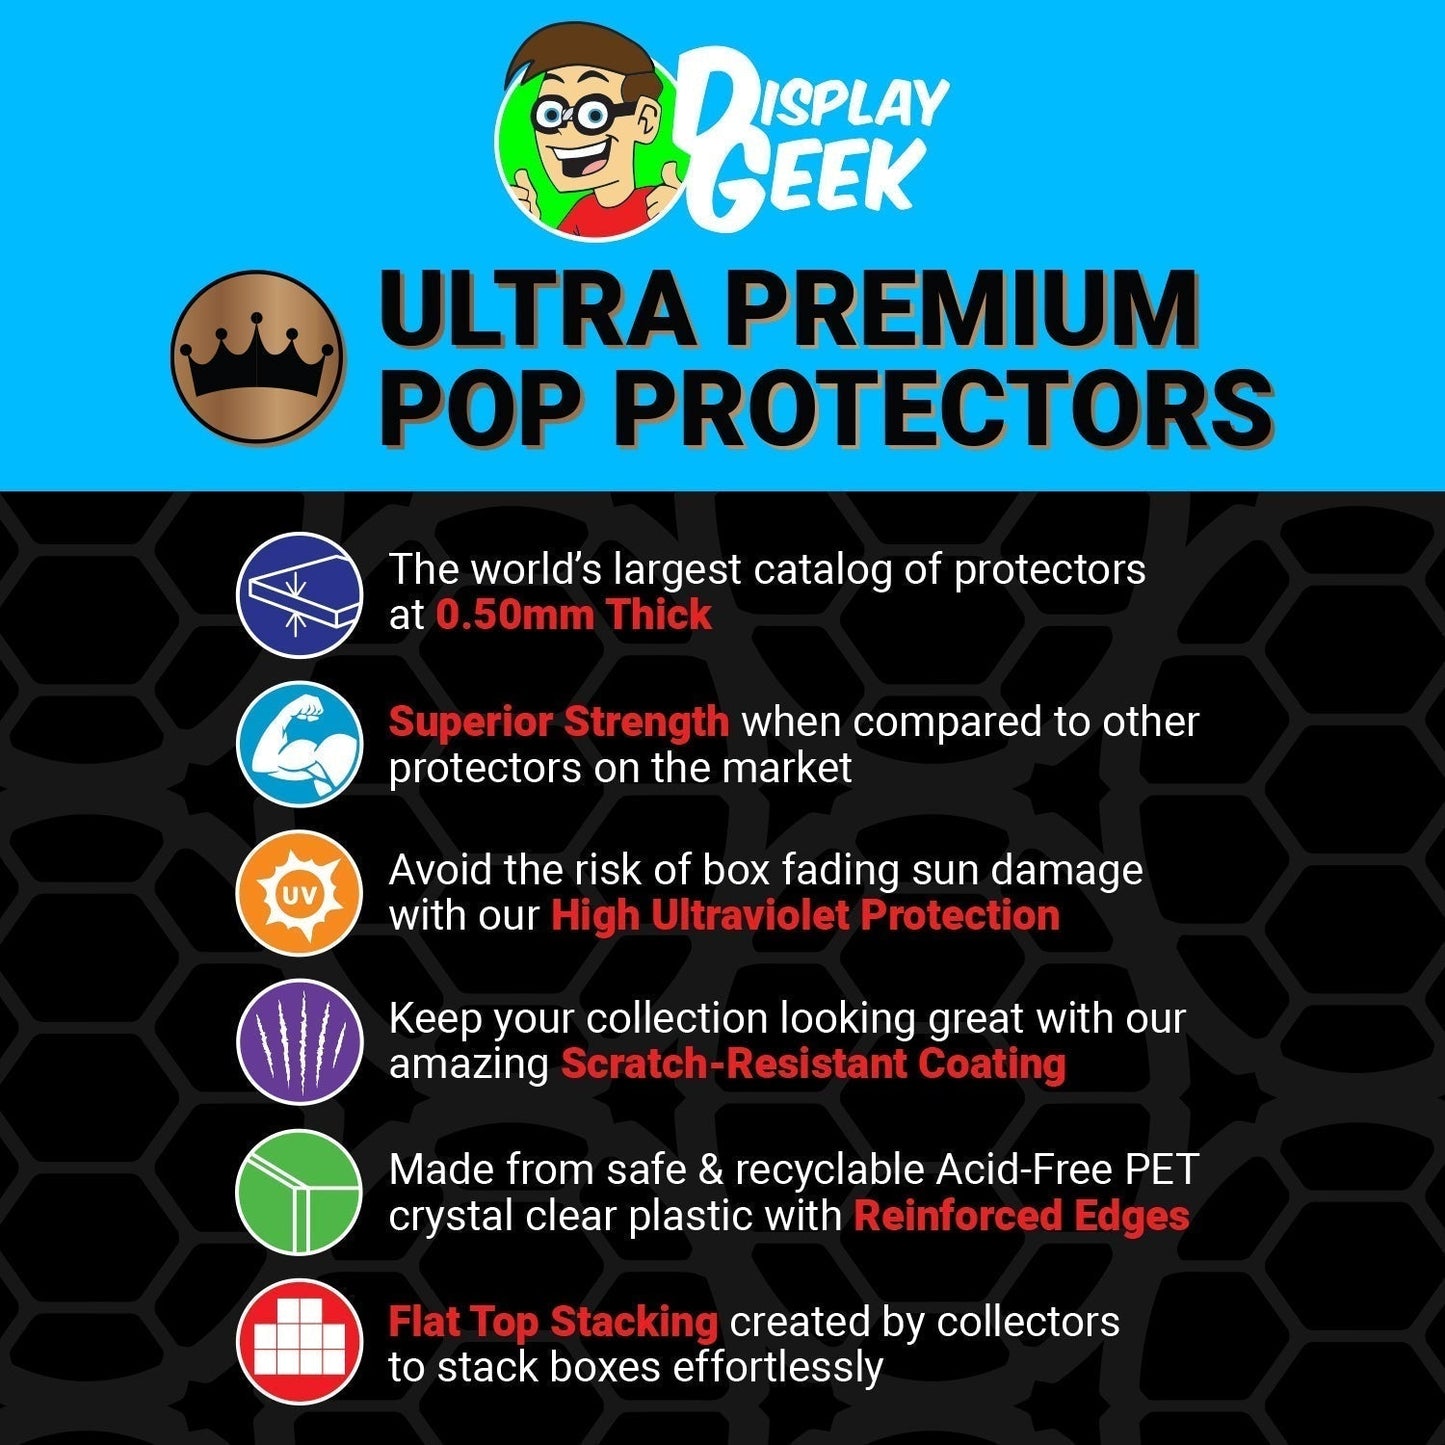 Pop Protector for Batgirl FunkO's Cereal Box - PPG Pop Protector Guide Search Created by Display Geek